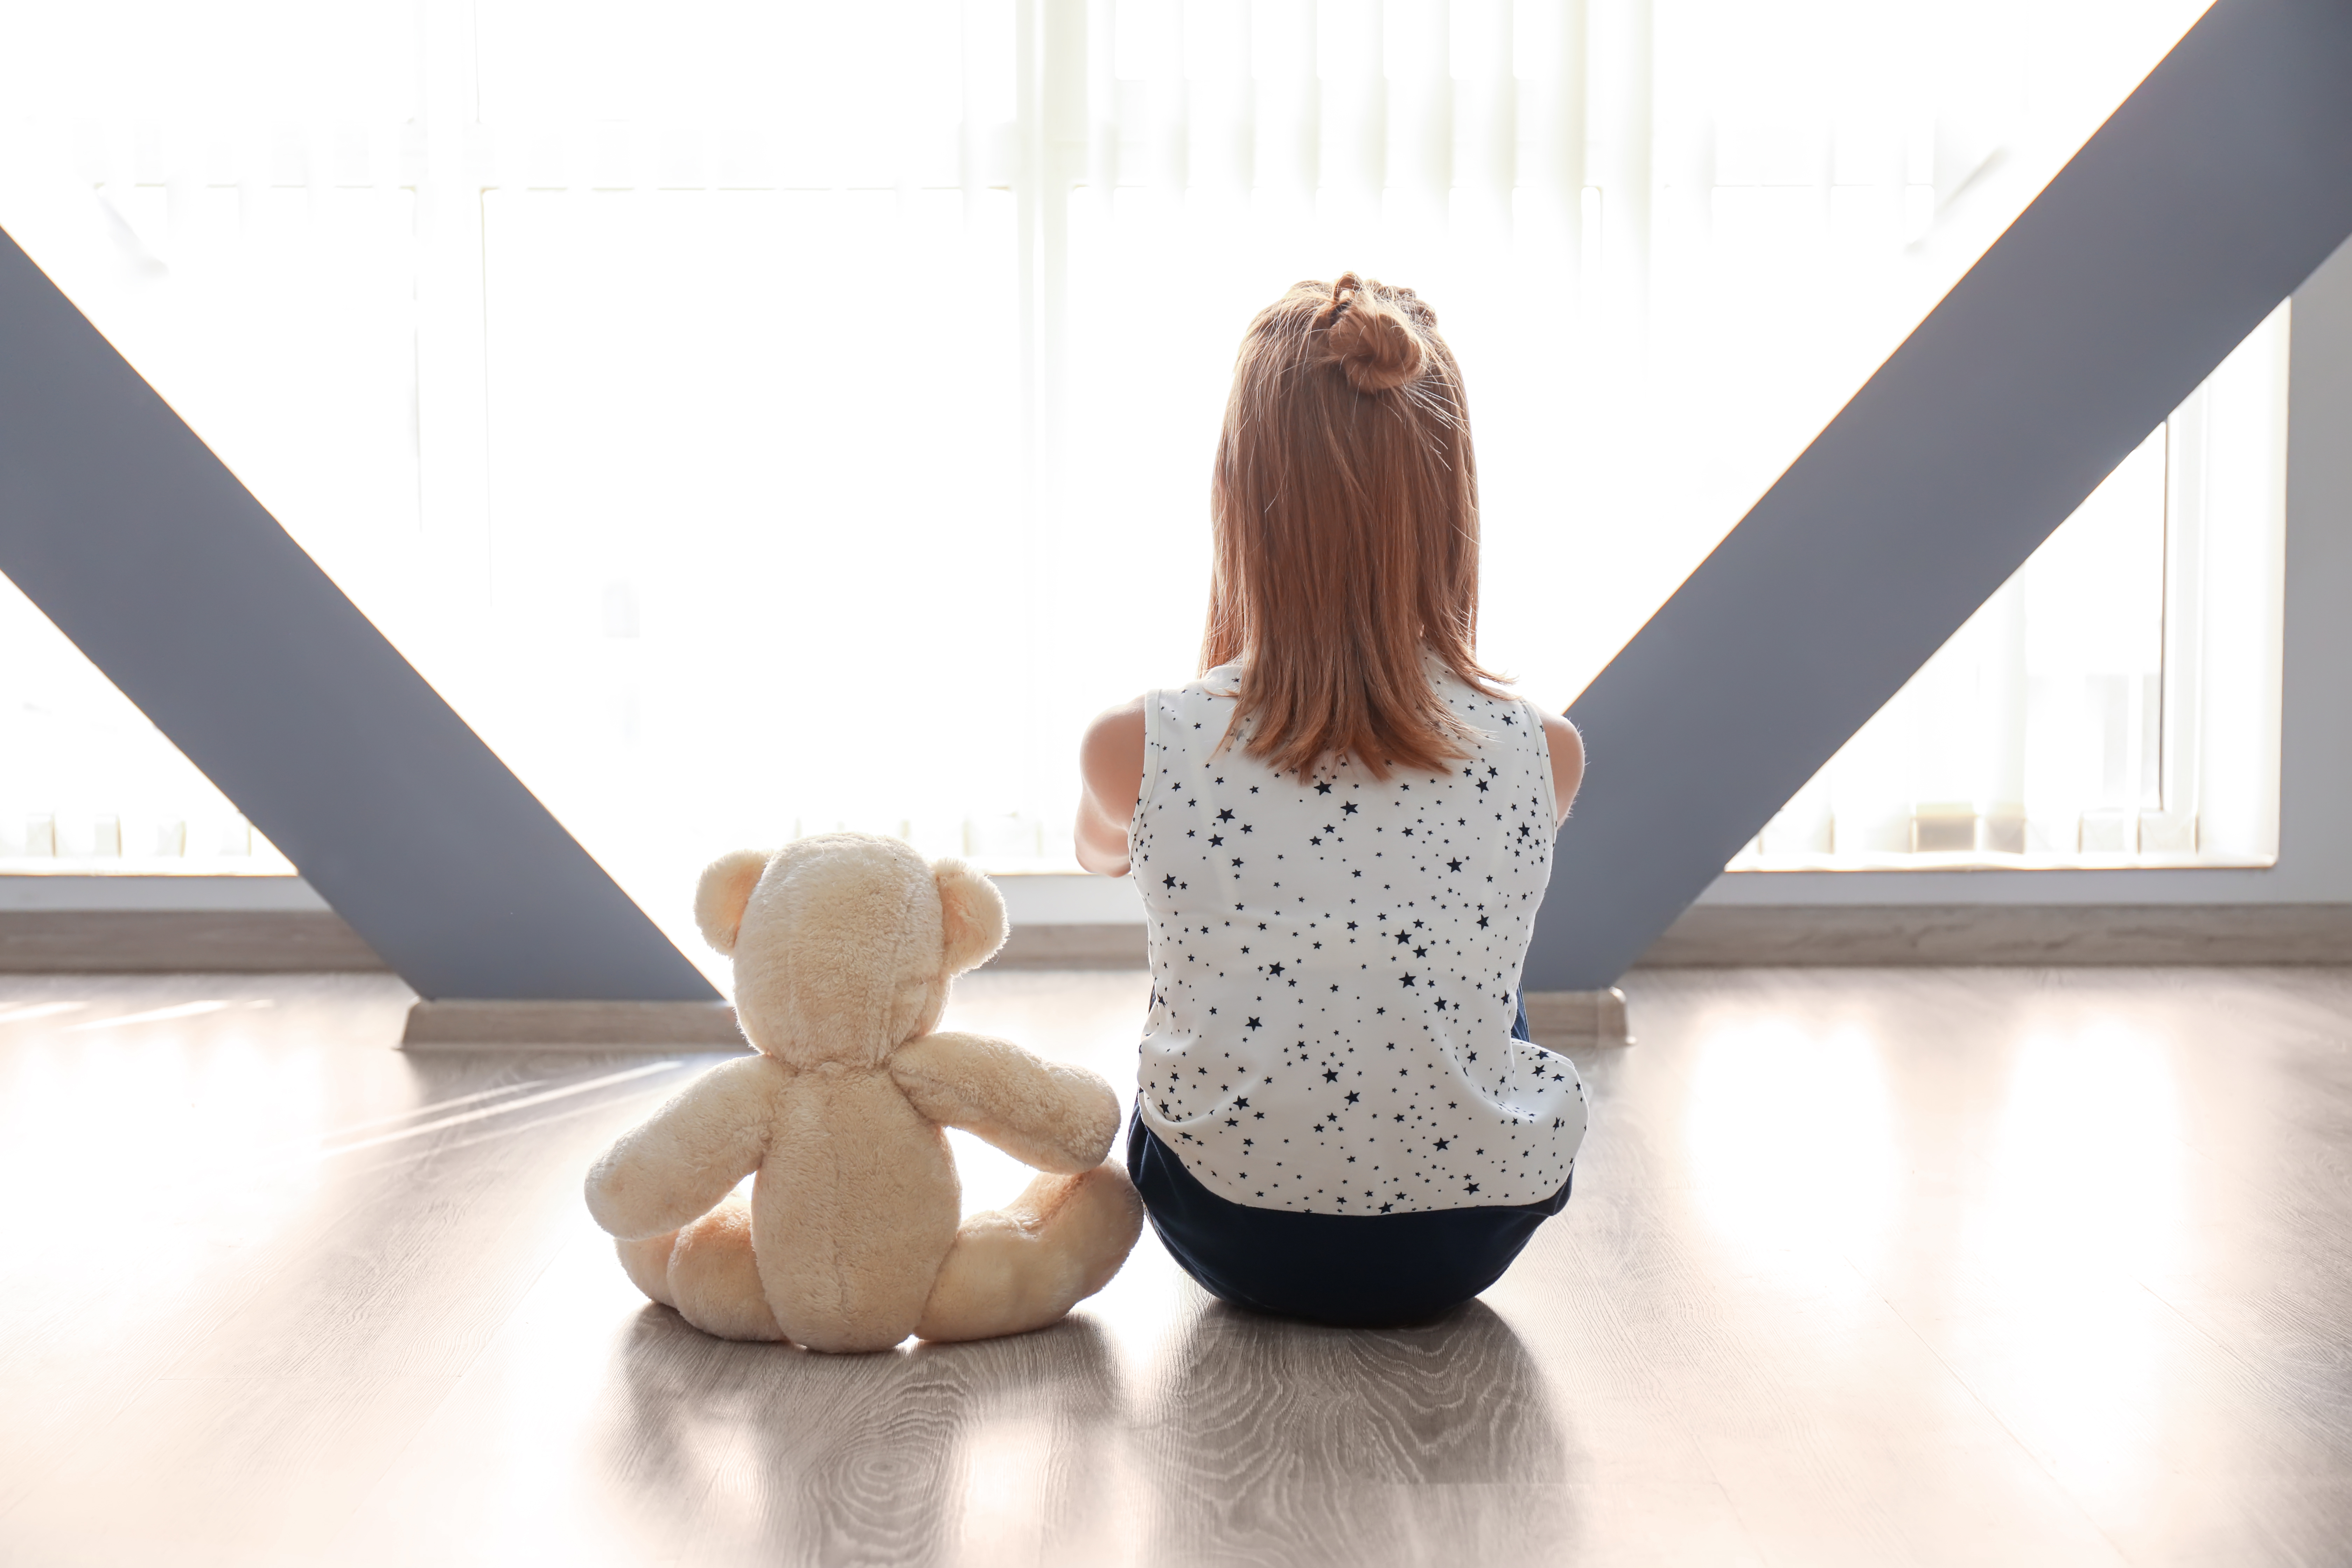 A young girl sitting alone on the floor with her teddy bear | Source: Shutterstock